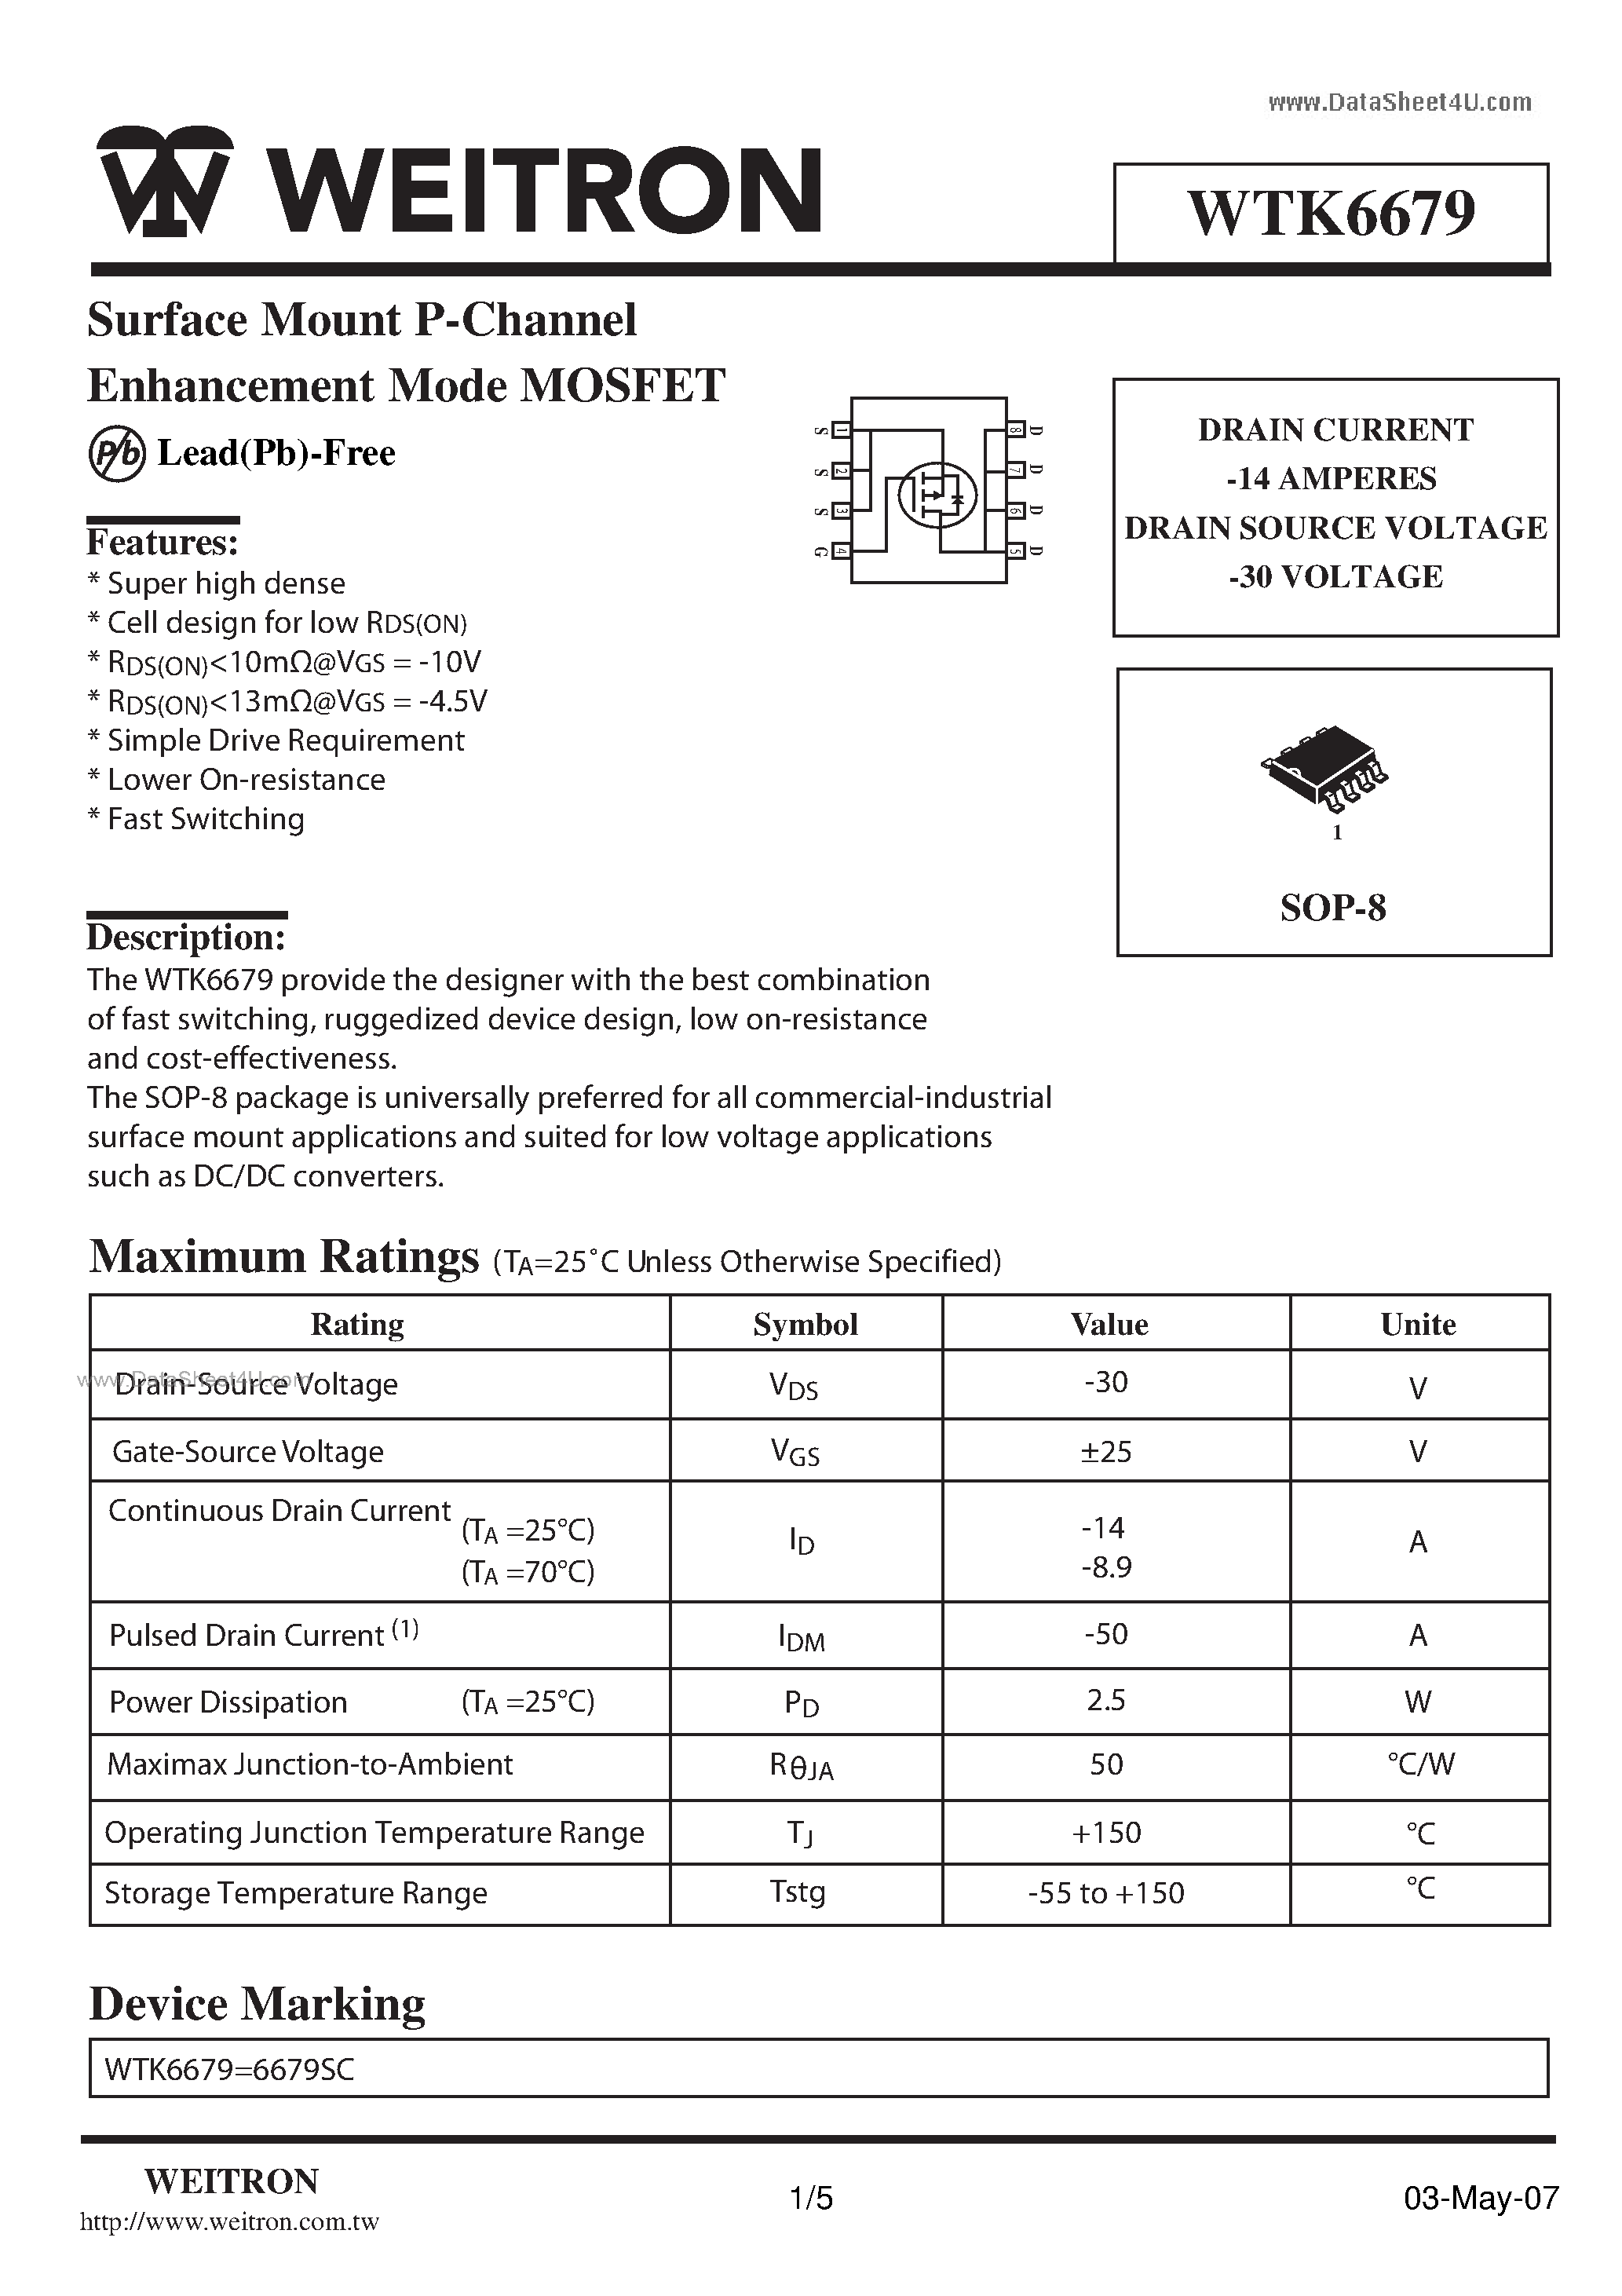 Datasheet WTK6679 - Surface Mount P-Channel Enhancement Mode MOSFET page 1